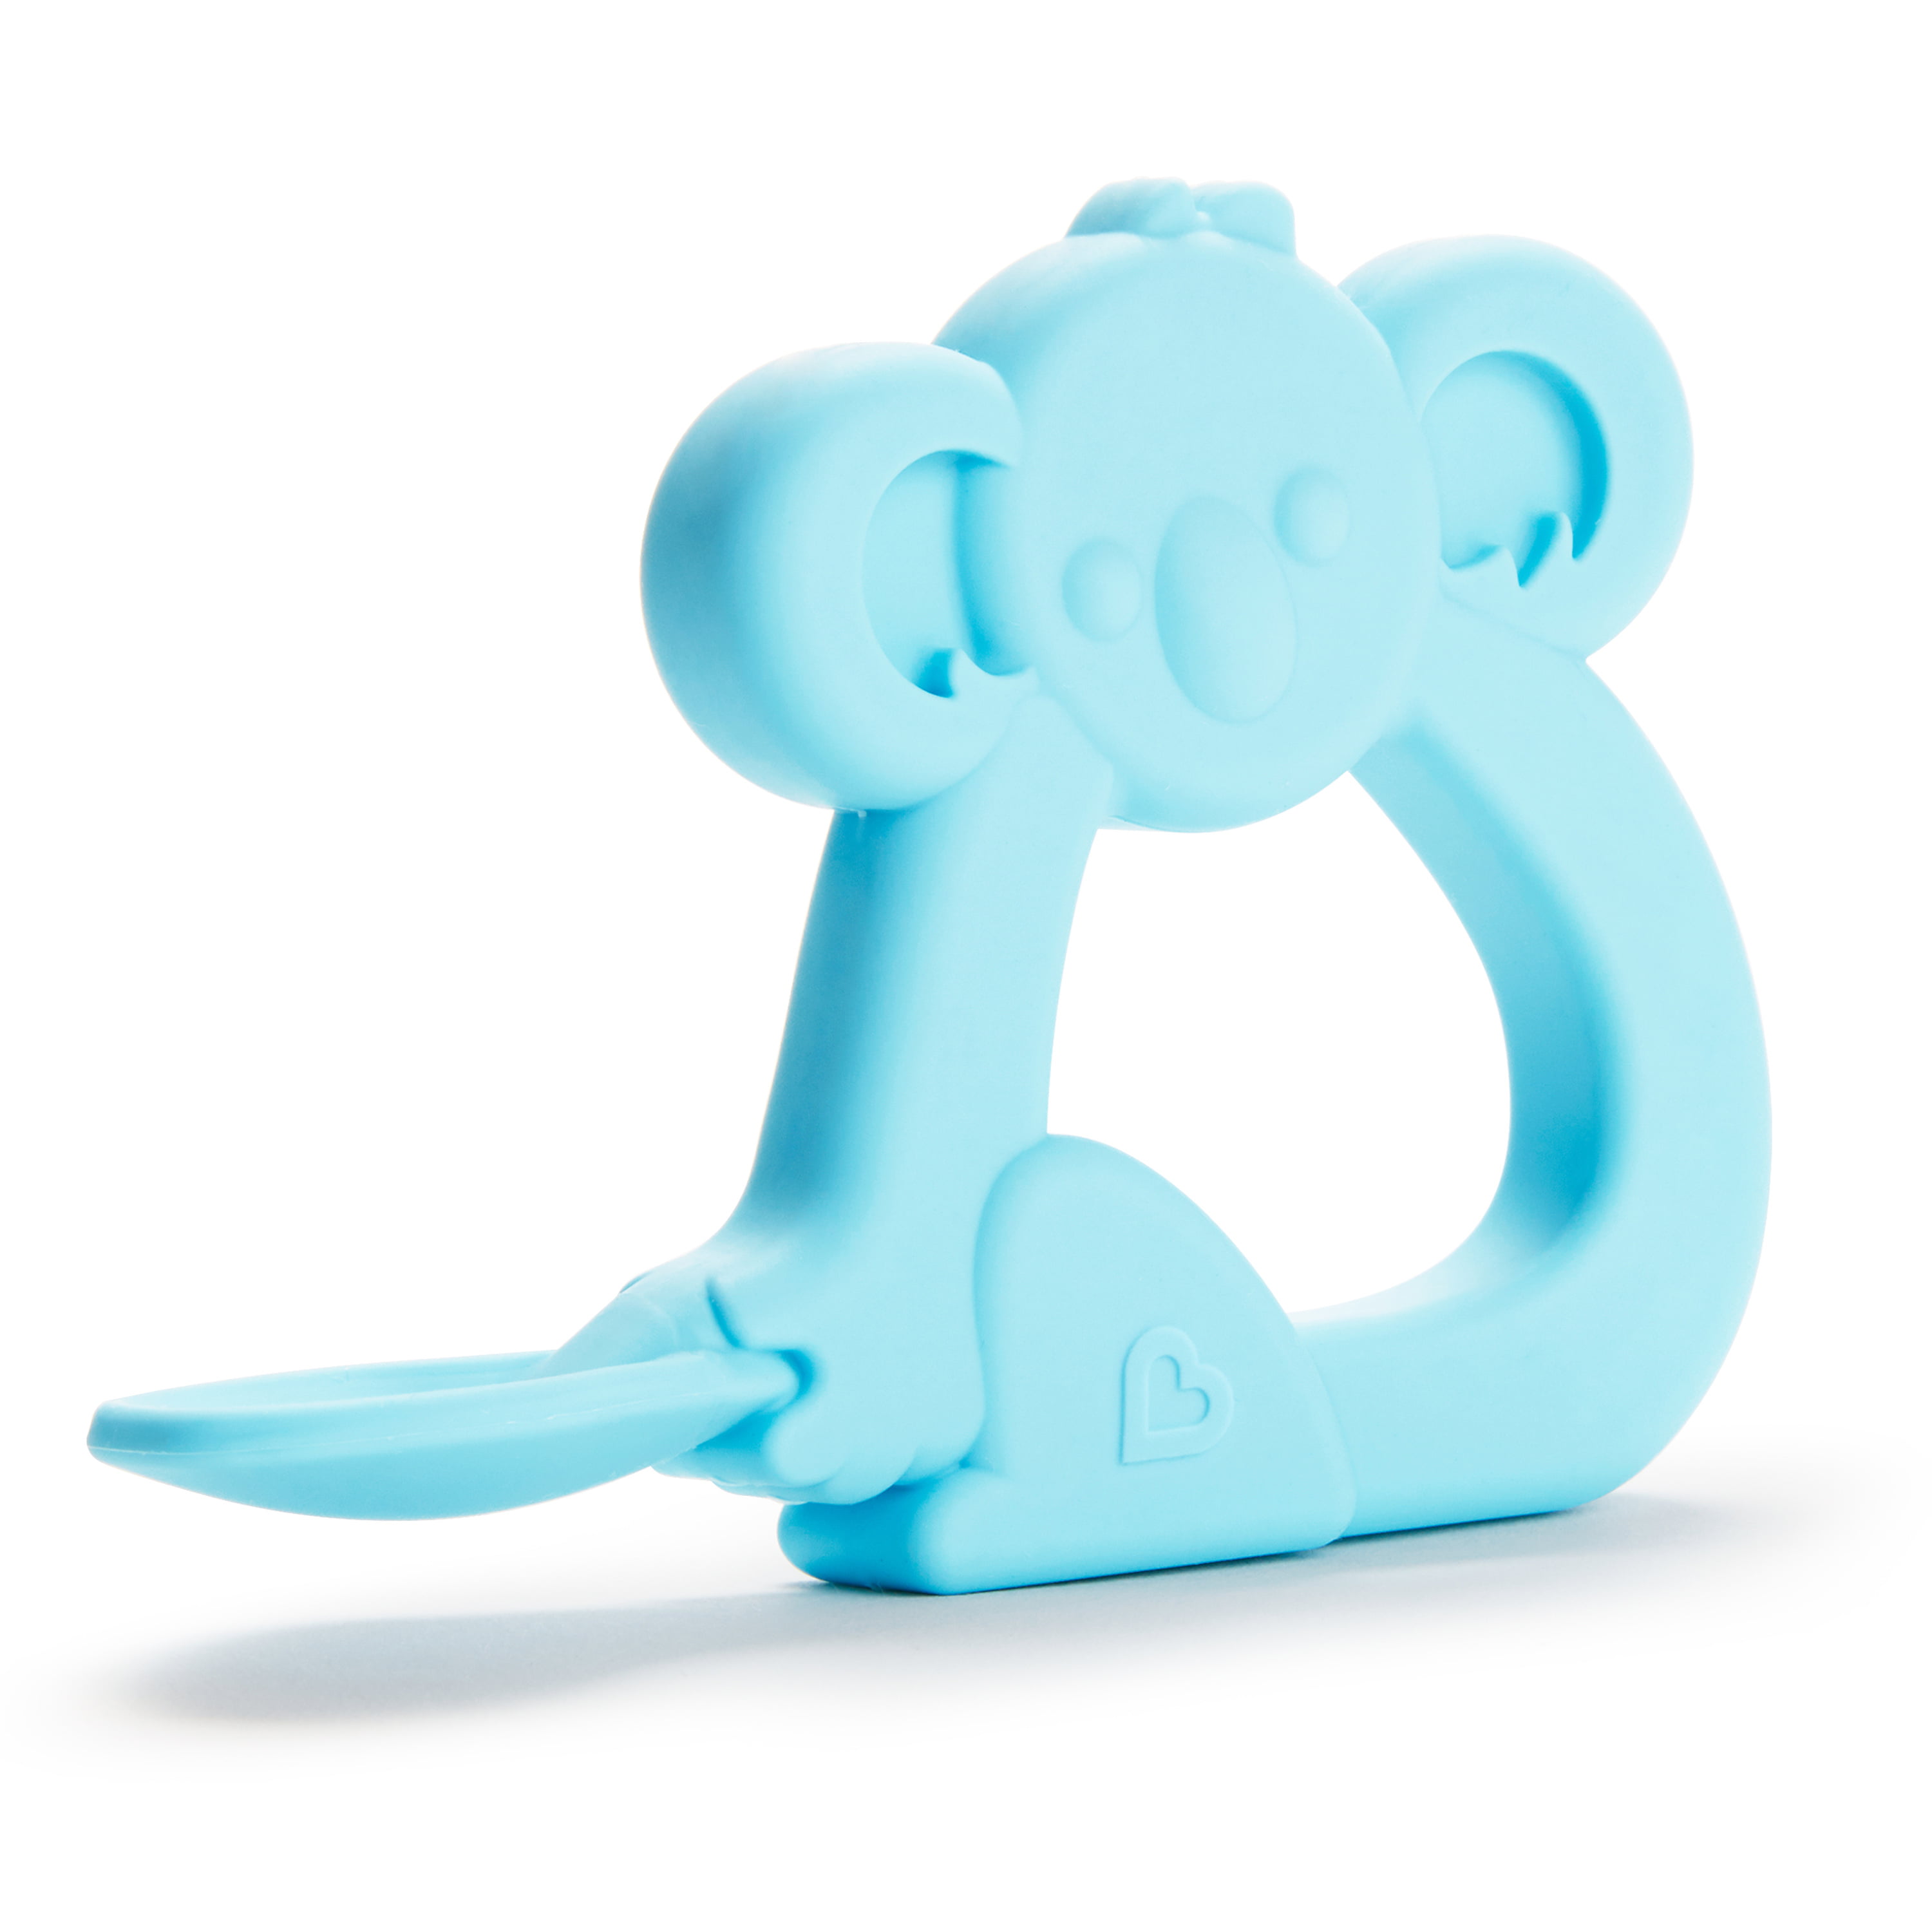 Munchkin® The Baby Toon™ Silicone Teether Spoon, Elephant, Mint (As Seen On  Shark Tank)